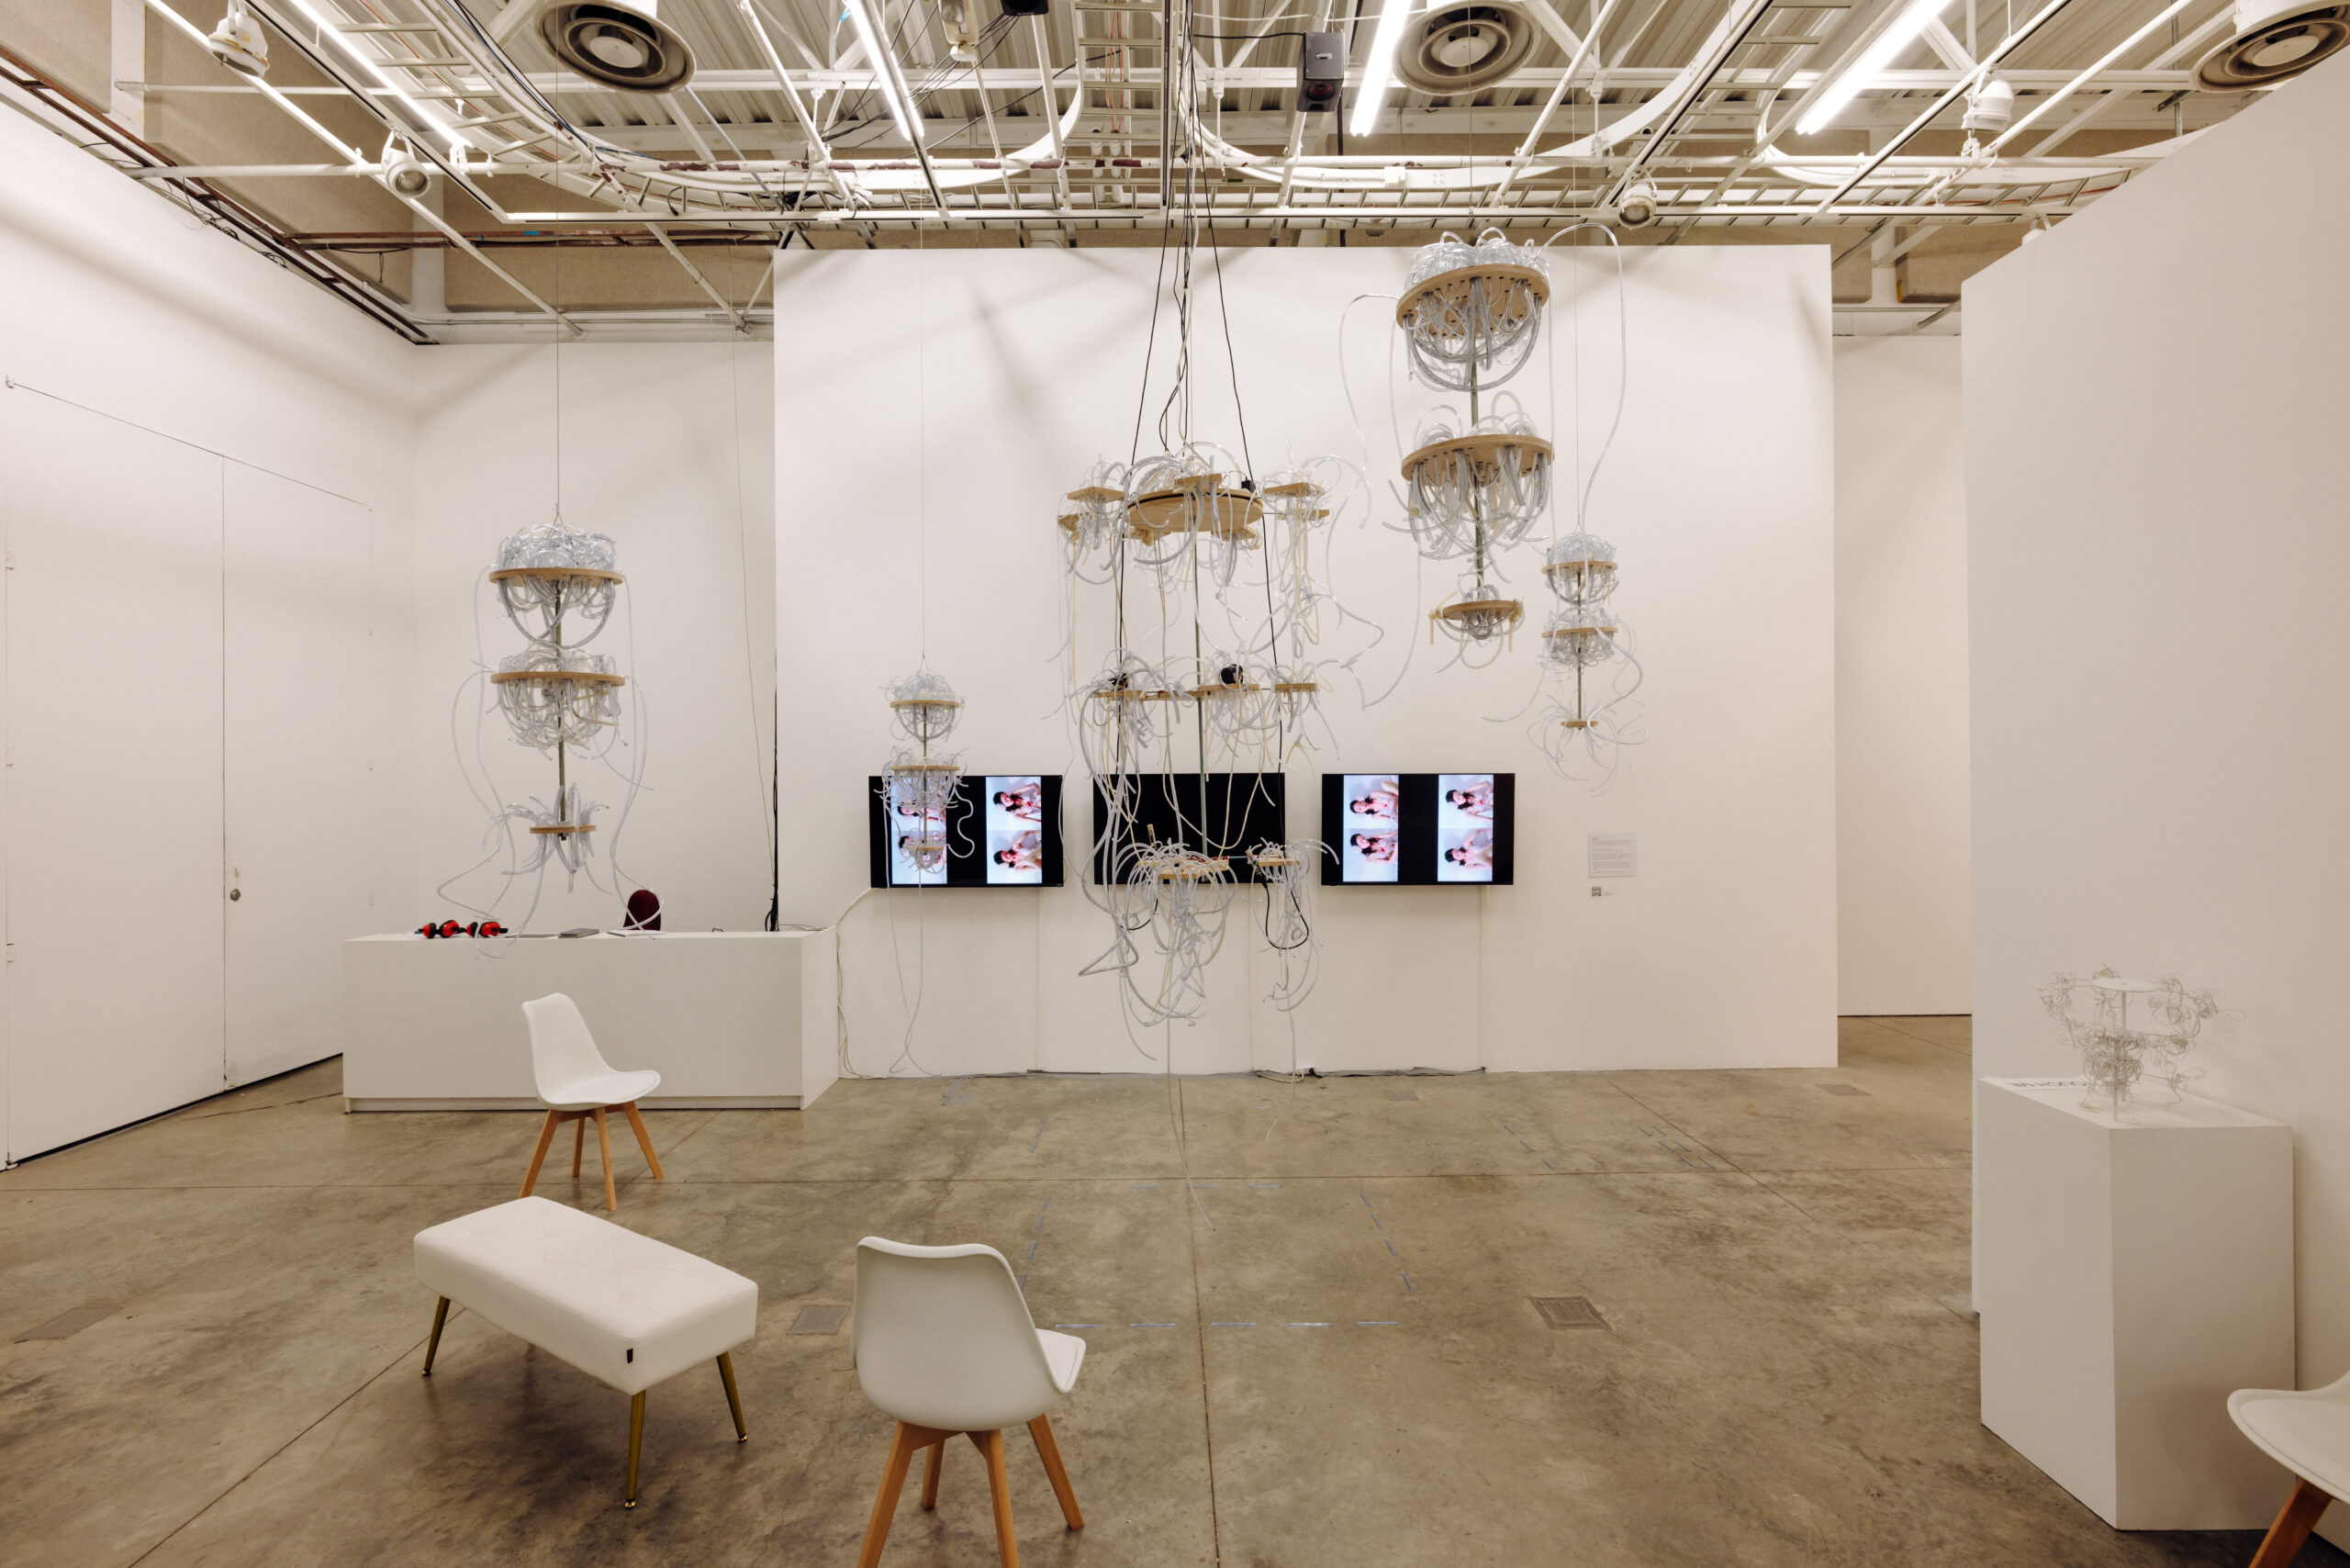 Five sculptures with wooden frames threaded with masses of plastic tubes spill out into the room, hanging from a ceiling grid framed by white gallery walls and white furniture. Three screens are mounted on the back wall, the center one is black, while the two on the sides display Cellular Corpses by thai Lu. In the right corner, two small 3D printed models of the sculptures live on a white pedestal stand. 